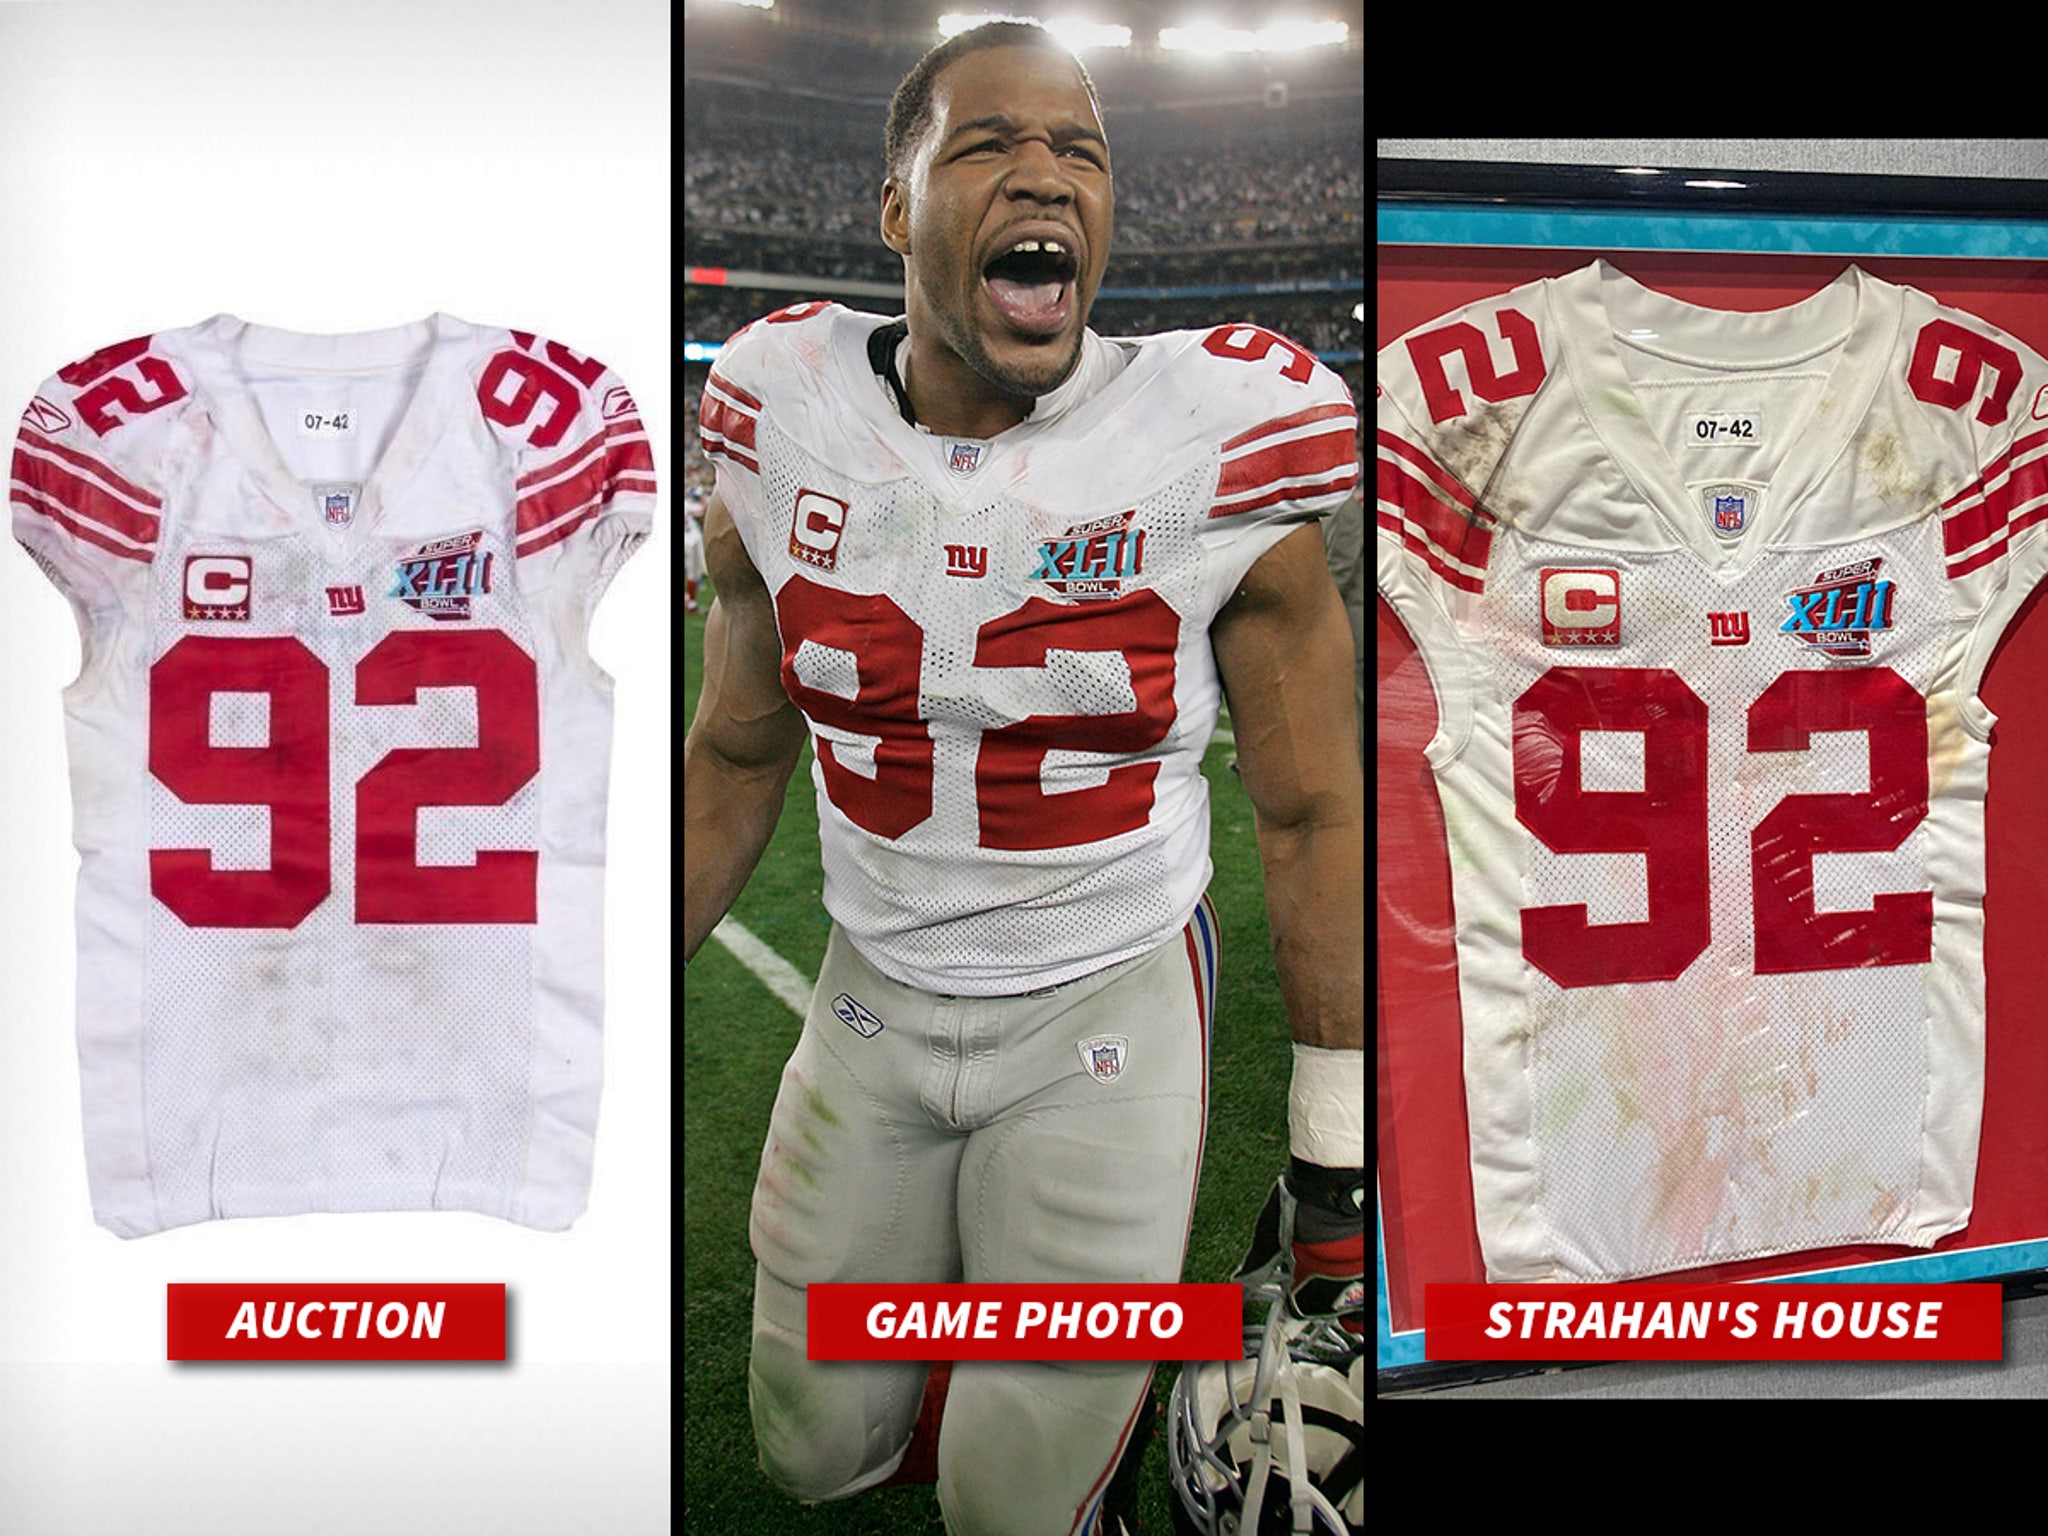 Michael Strahan says jersey being auctioned is fake: report